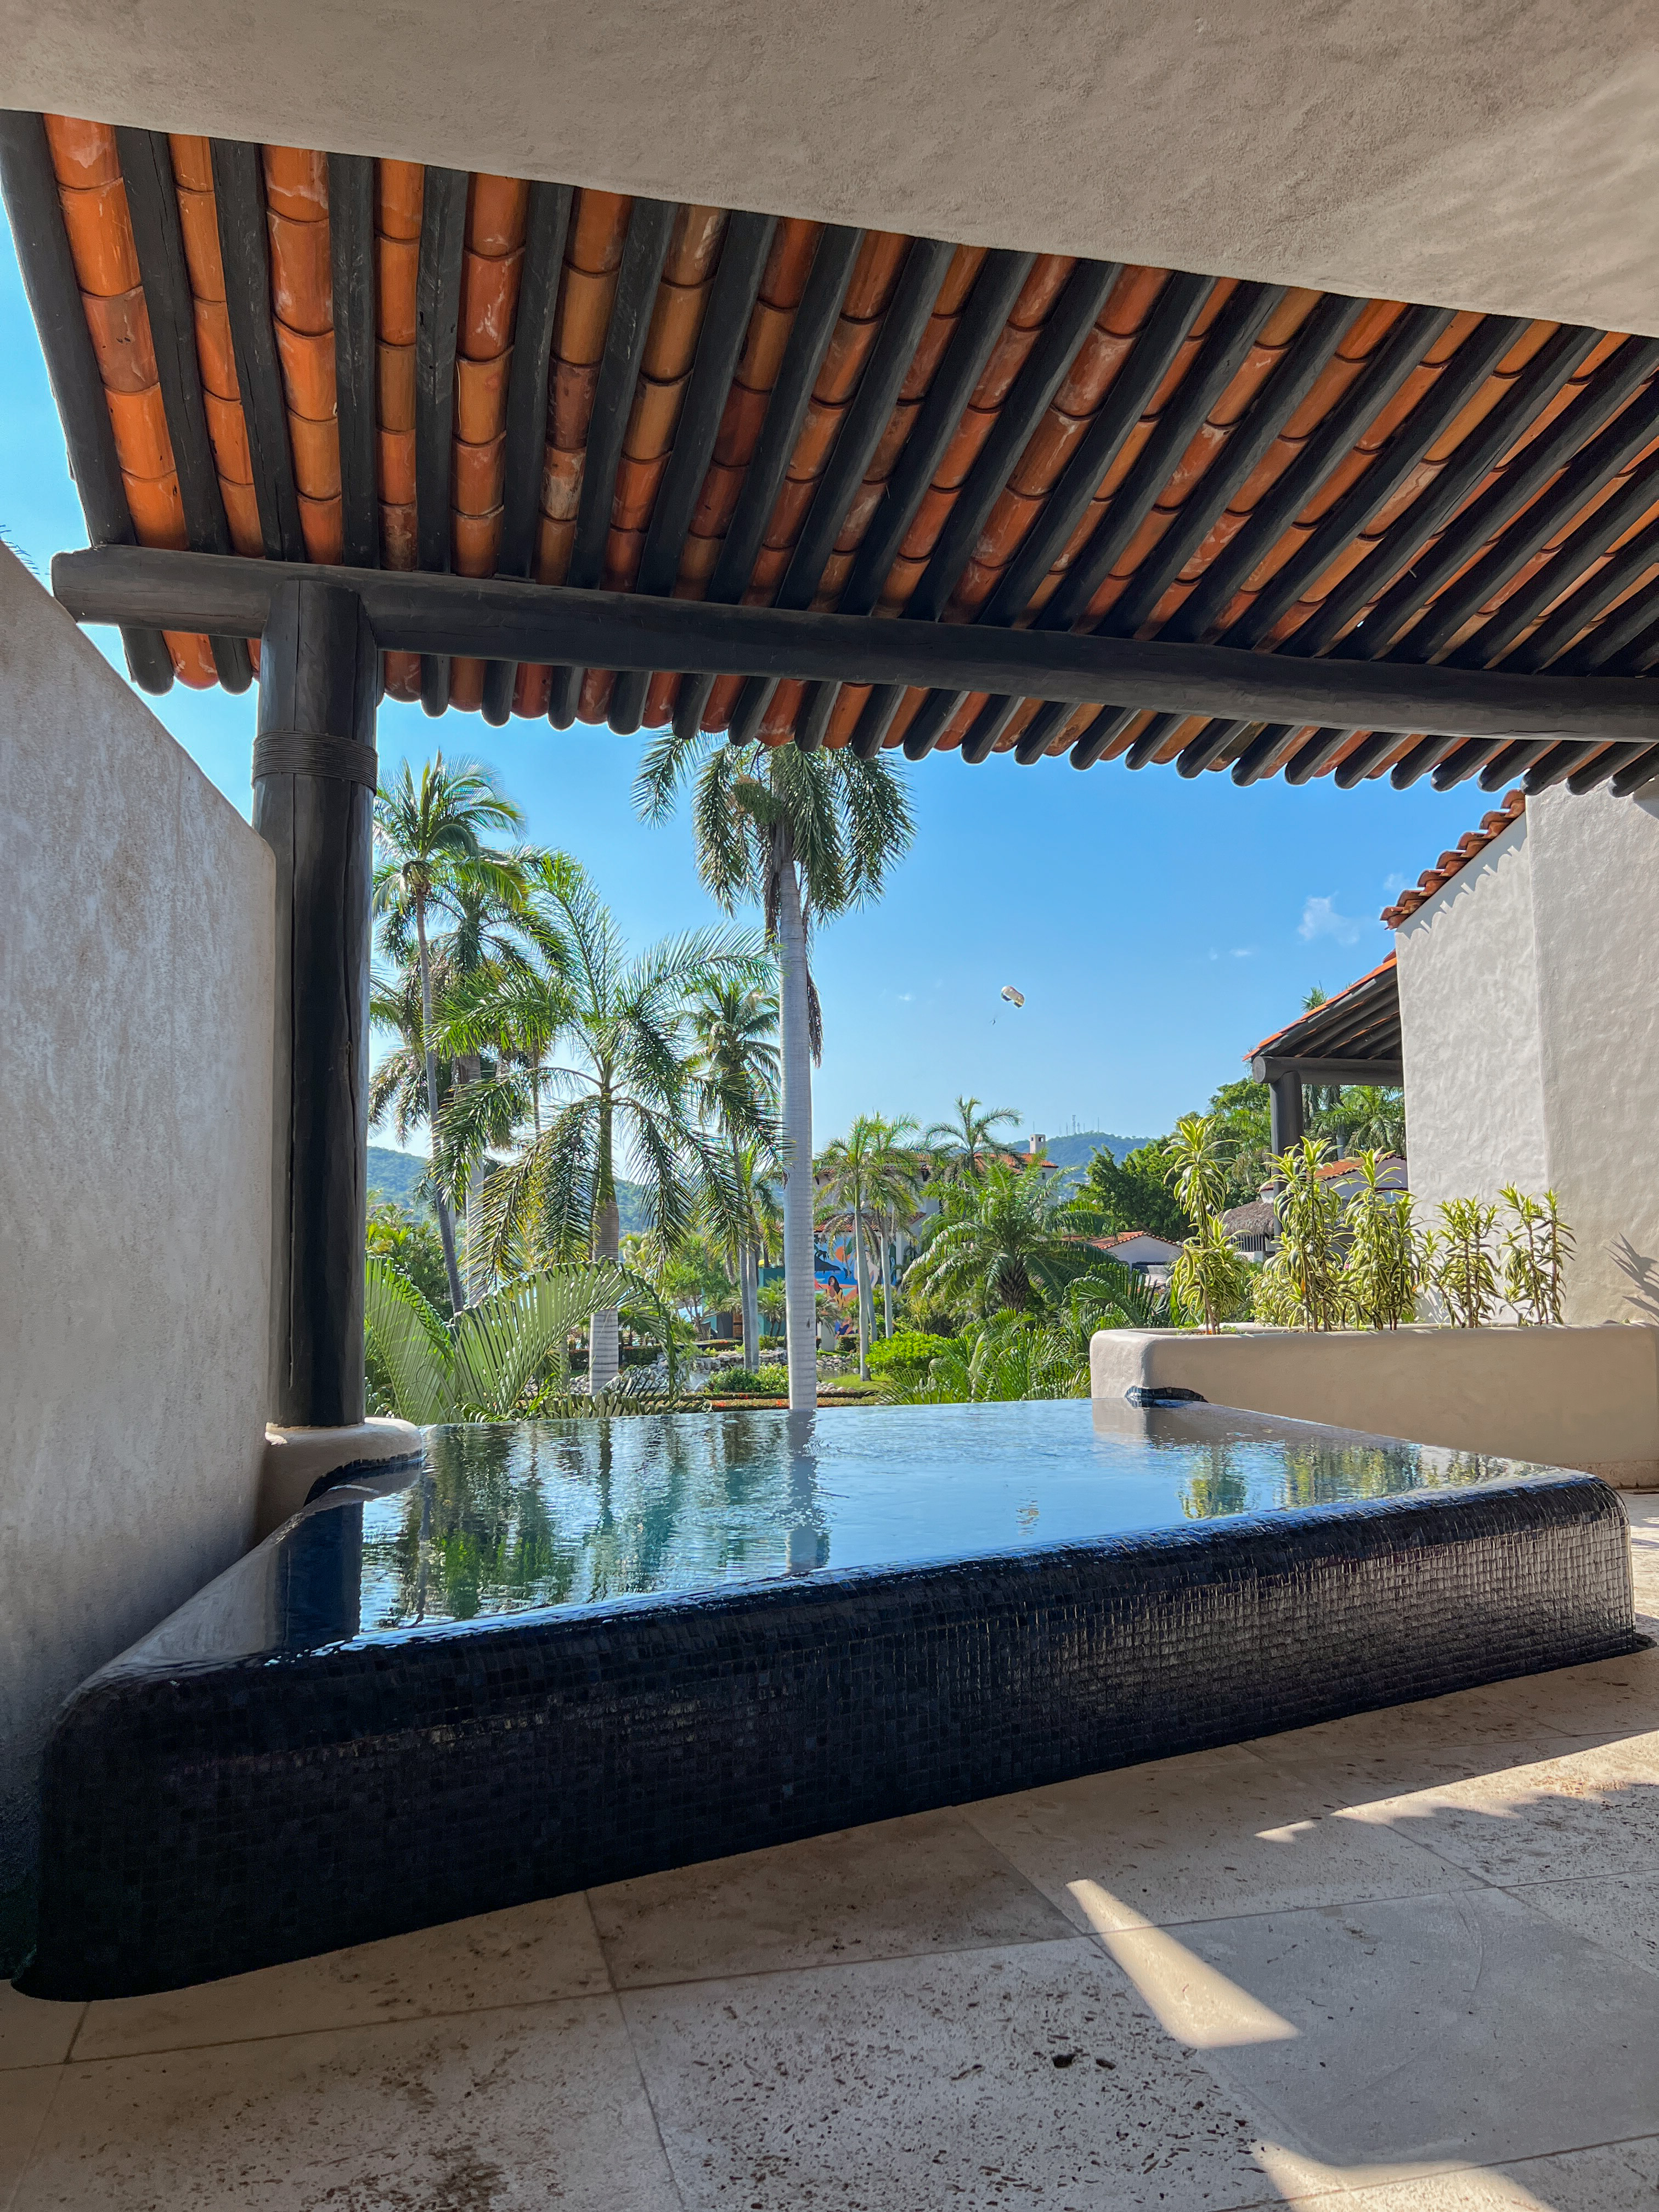 The Thompson Hotel Zihuatanejo Photo by Compass + Twine